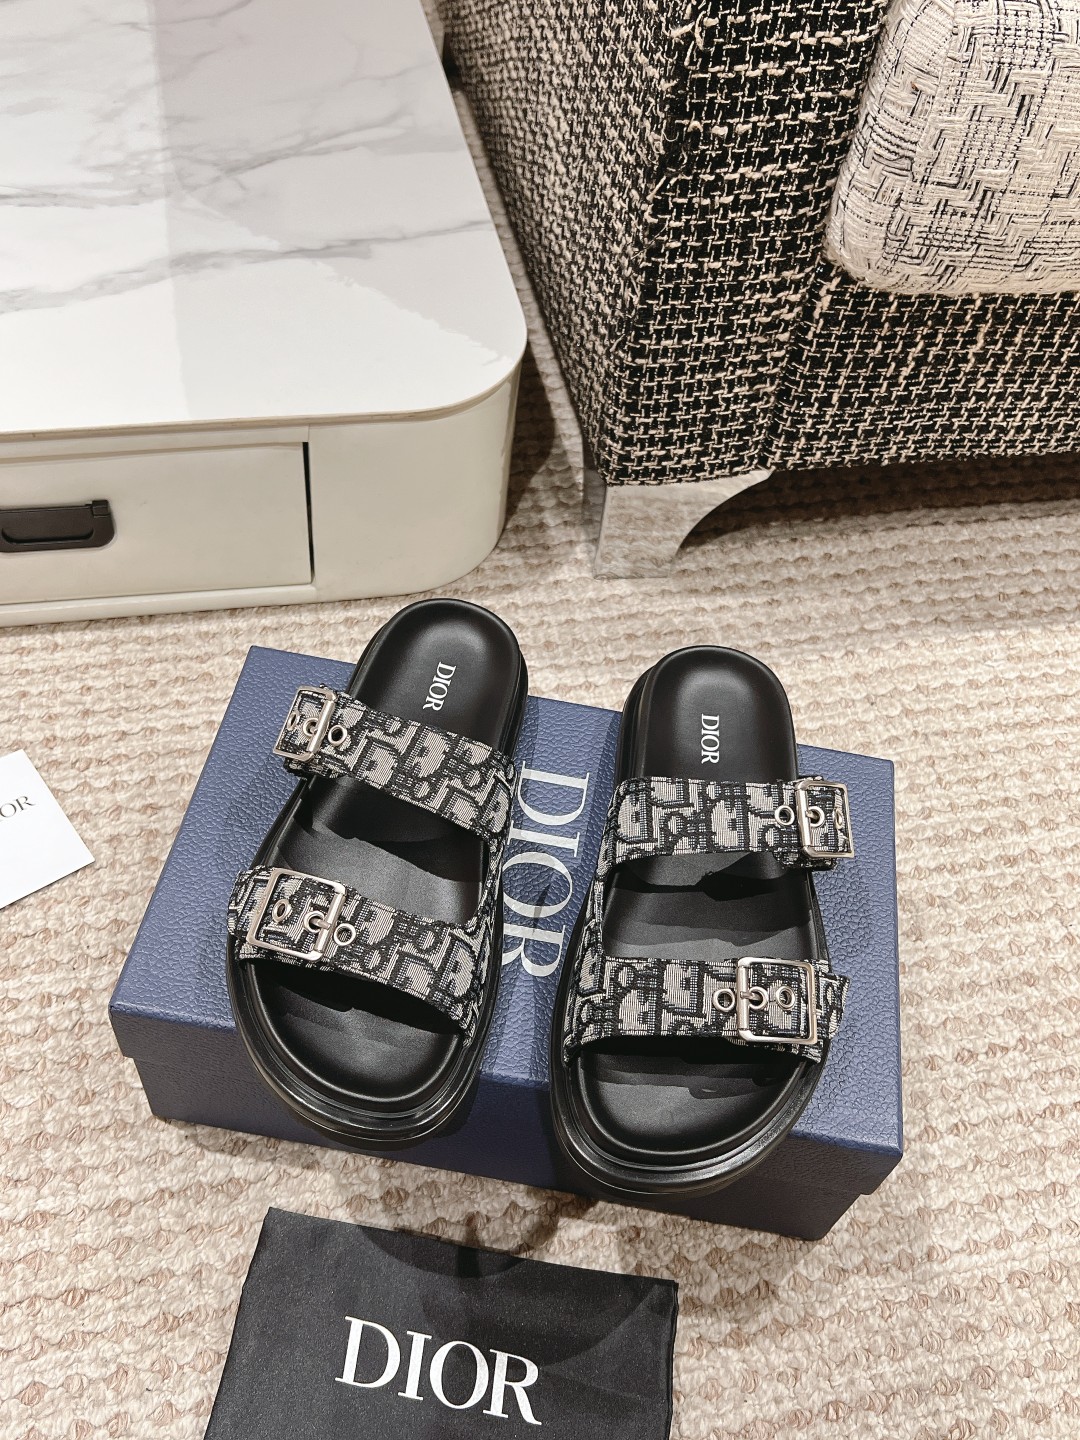 Dior Shoes Sandals Slippers High Quality 1:1 Replica
 Men Calfskin Cowhide Denim Rubber Summer Collection